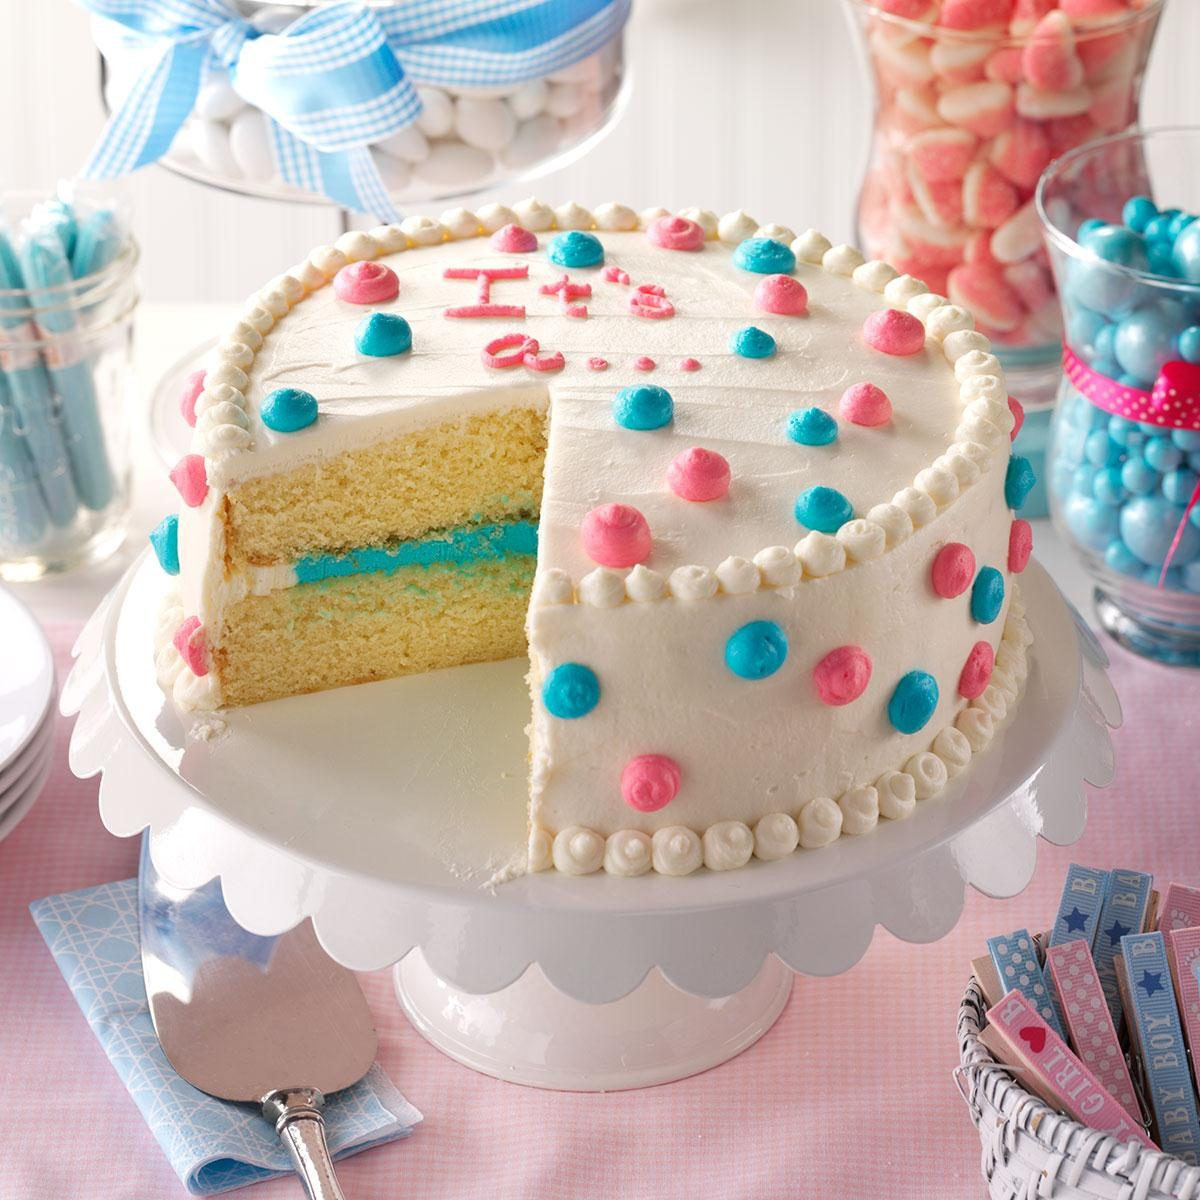 Food Ideas For Baby Gender Reveal Party
 The Cutest Gender Reveal Party Food Ideas